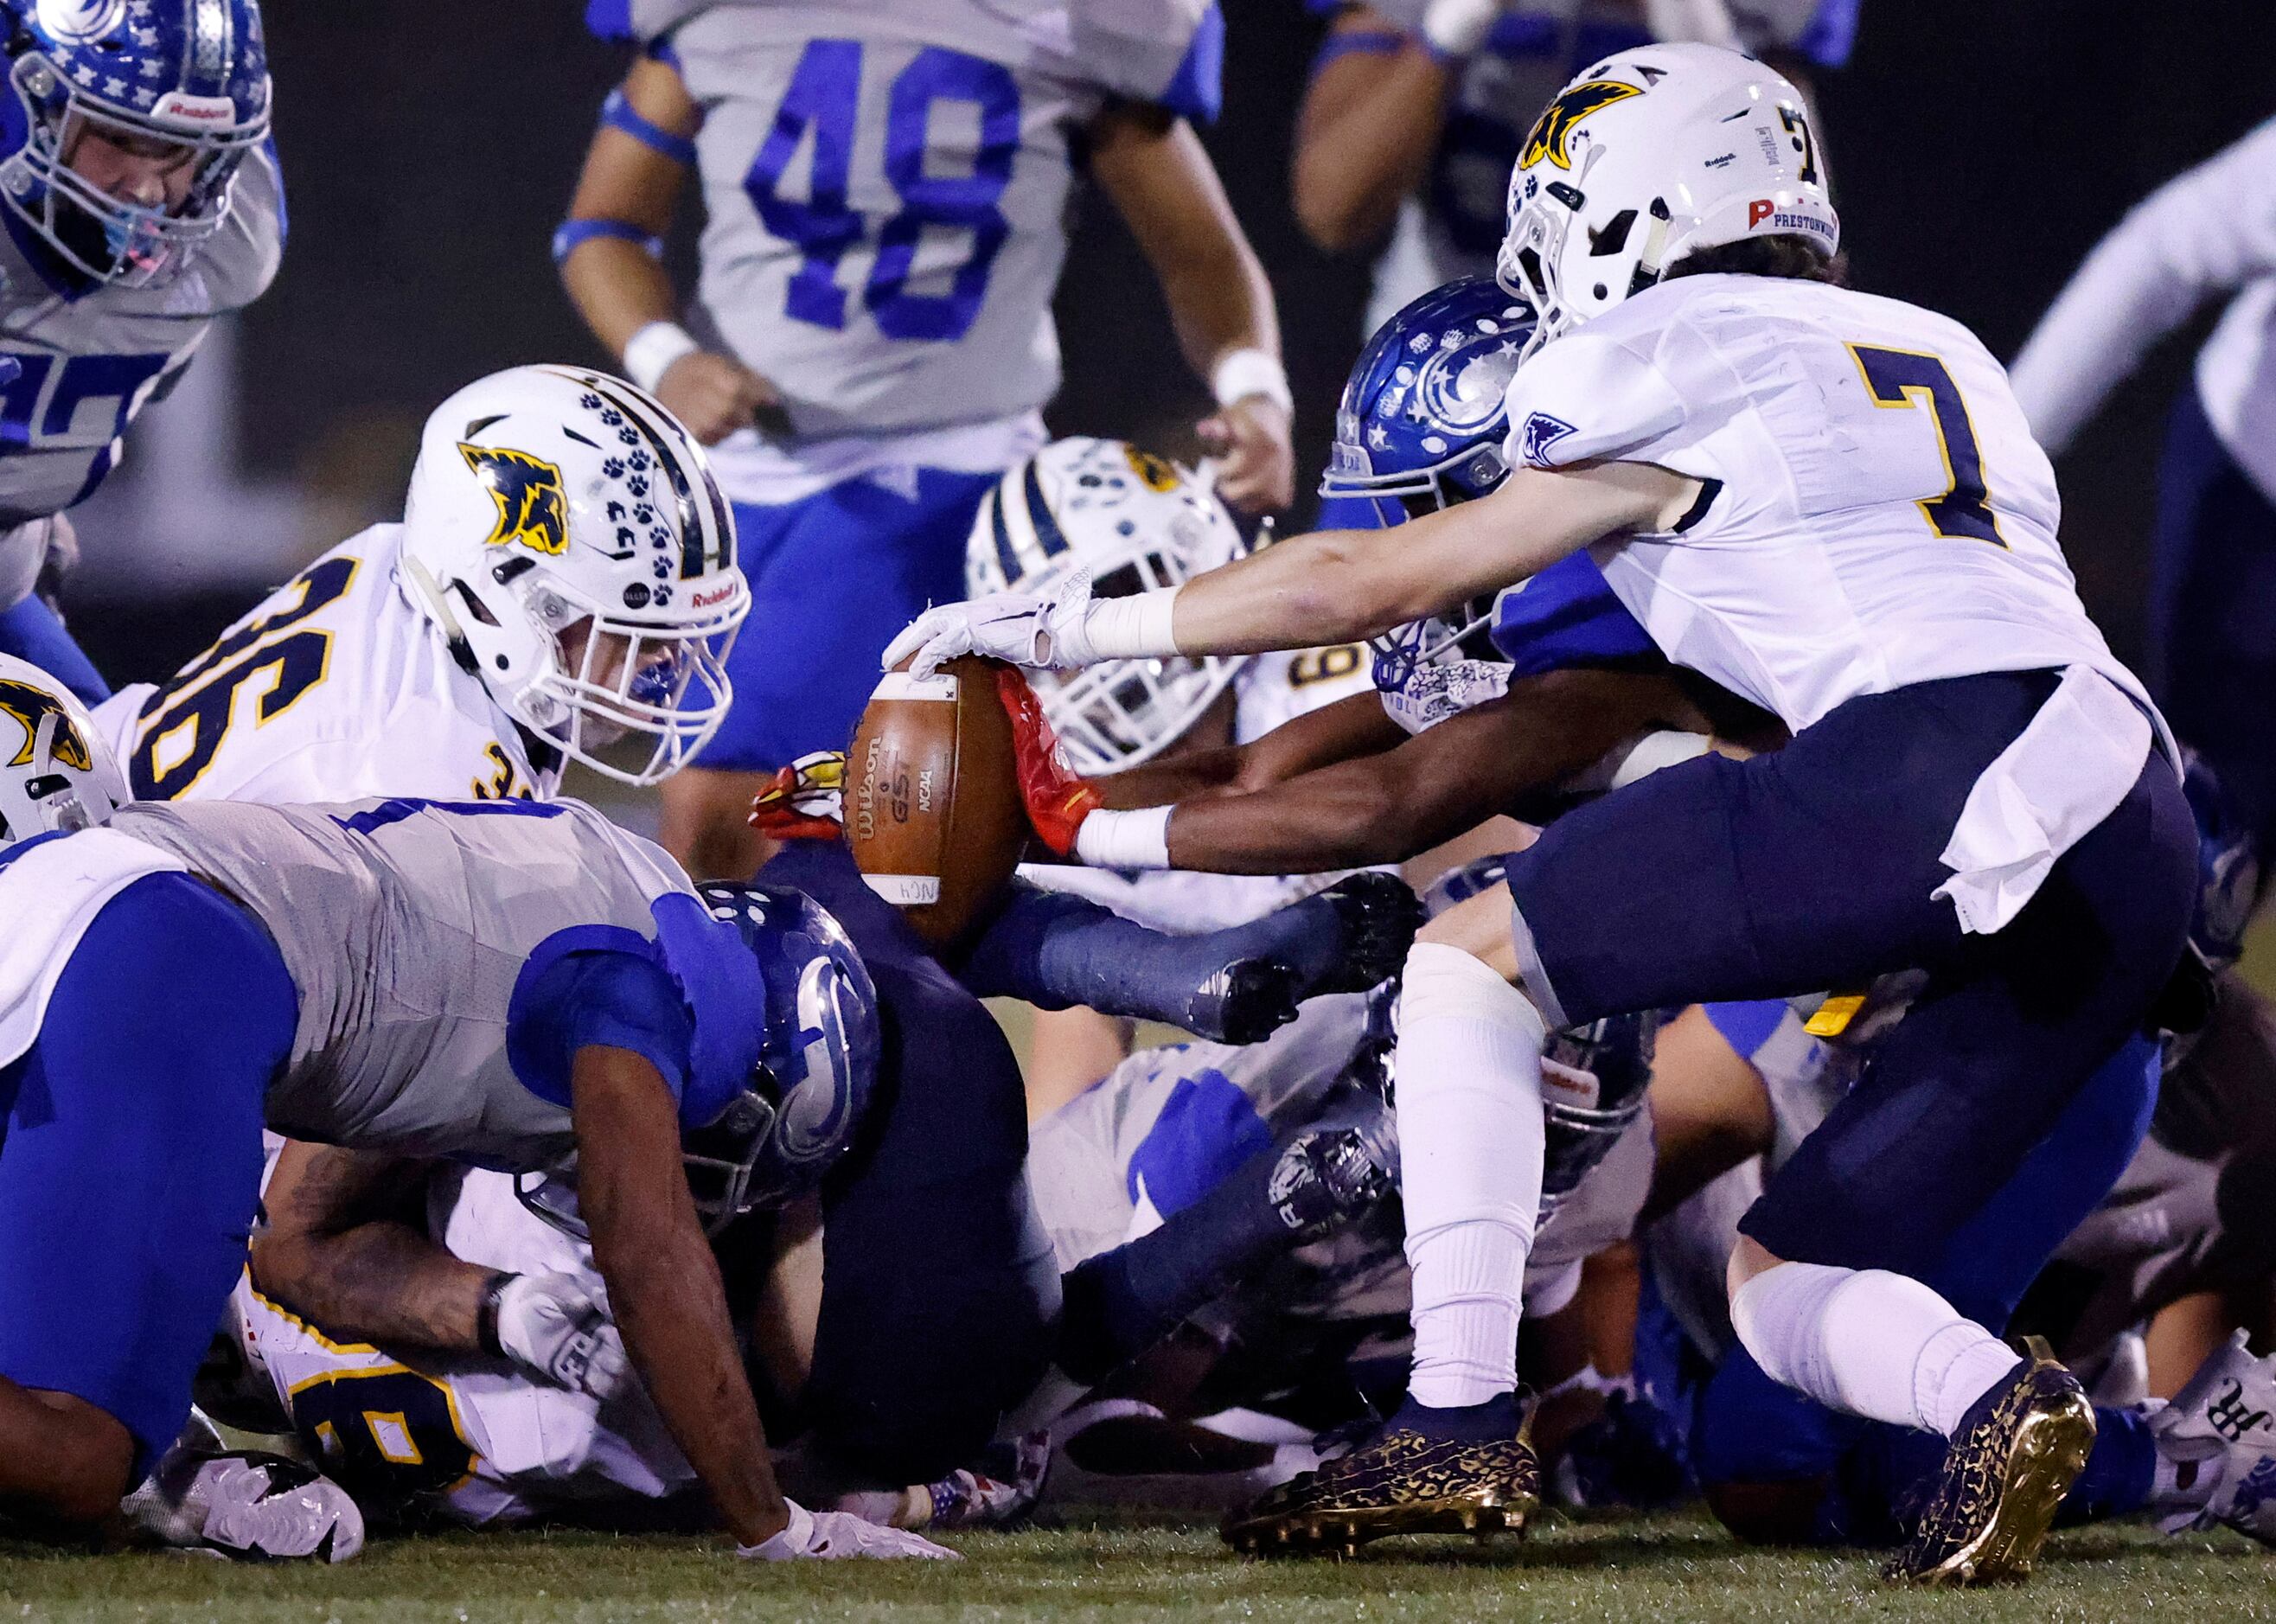 It was a mad scramble for the football by both Plano Prestonwood Christian Academy and Fort...